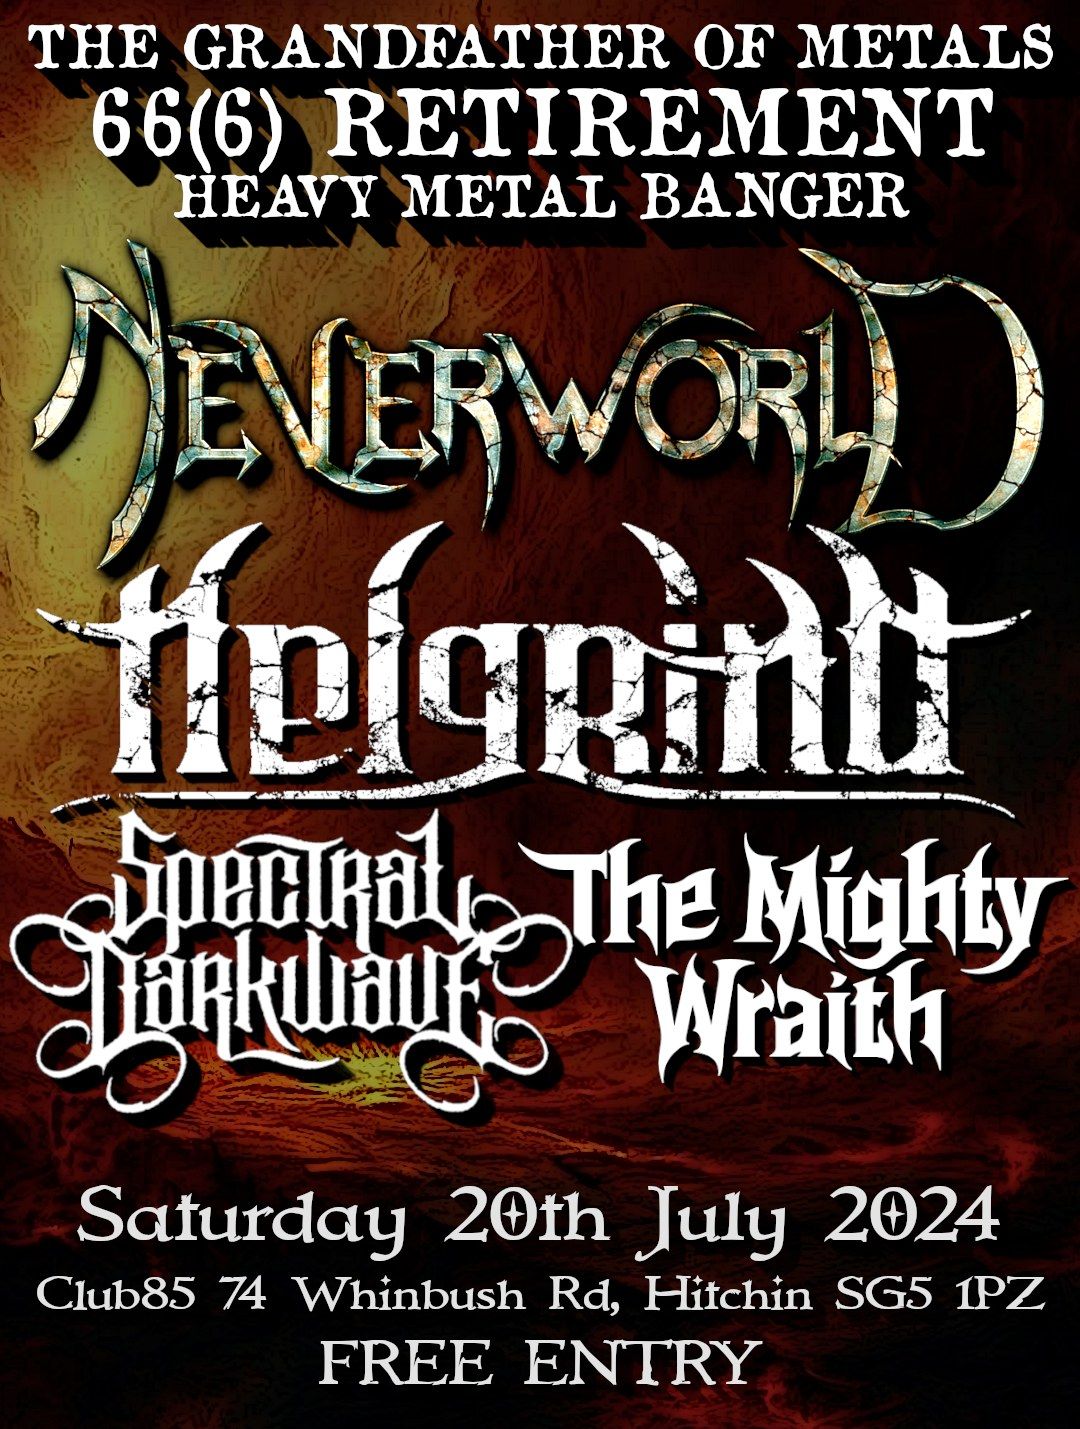 The Grandfather of Metal's Heavy Metal Banger - FREE ENTRY